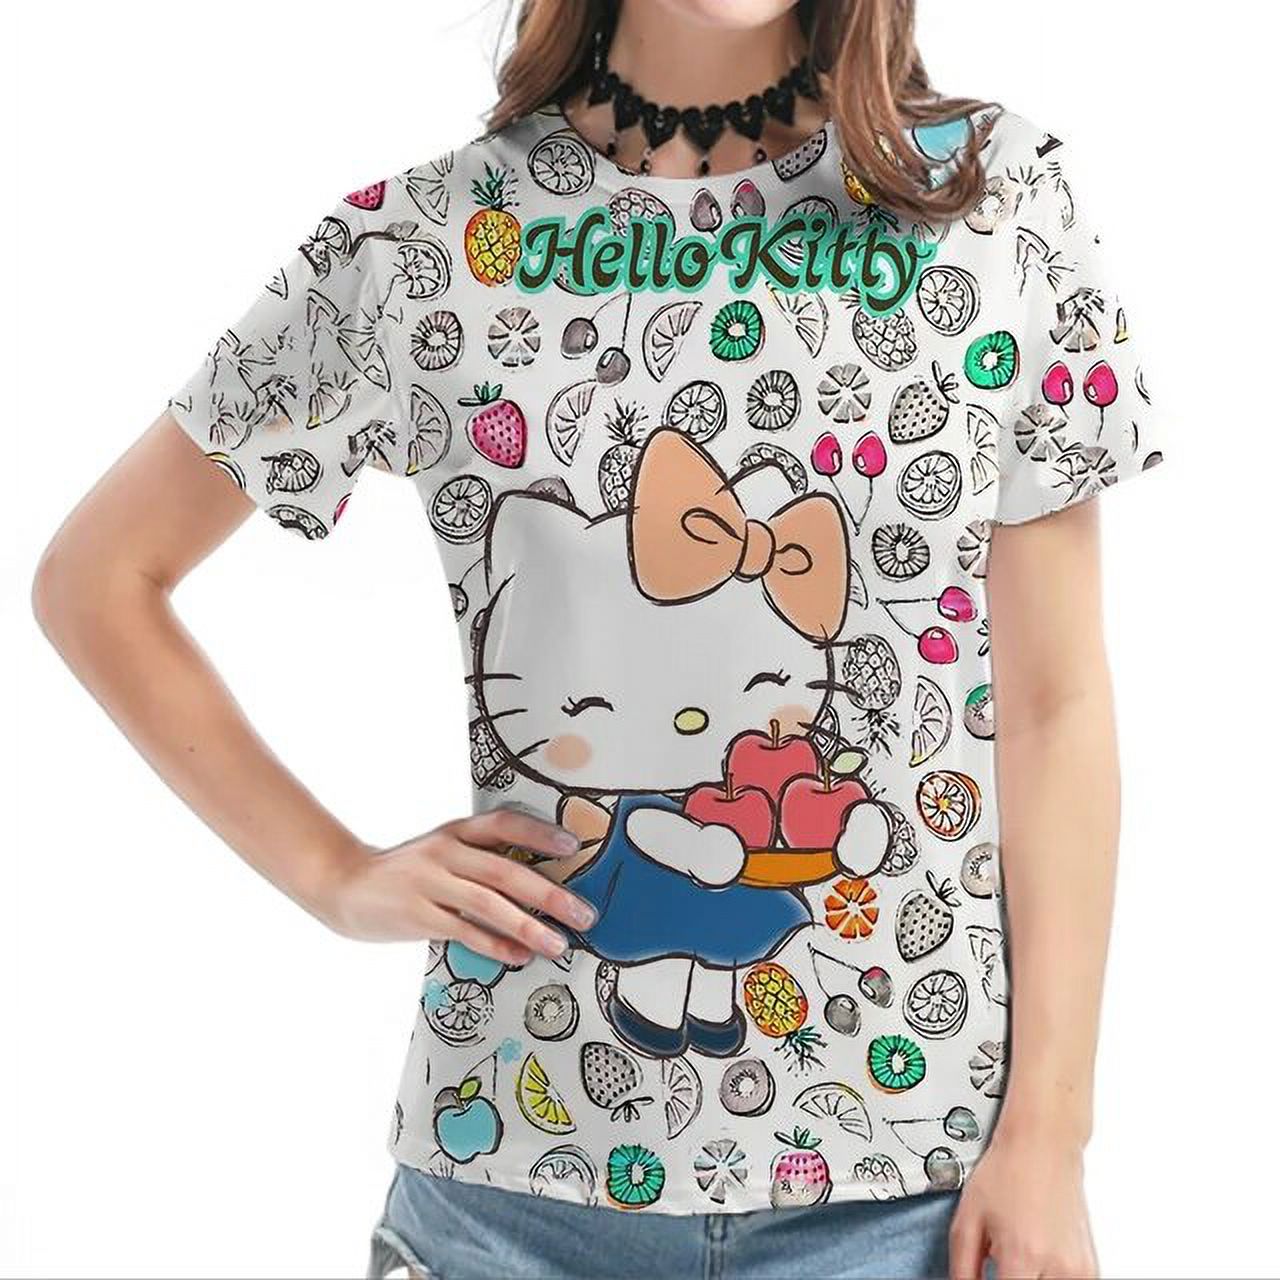 Summer Women‘s T Shirt For Ladies‘s Short Sleeve Tops Tees Fashion Print Hello Kitty Graphics T-shirt For Women‘s Y2k Clothing - image 1 of 6